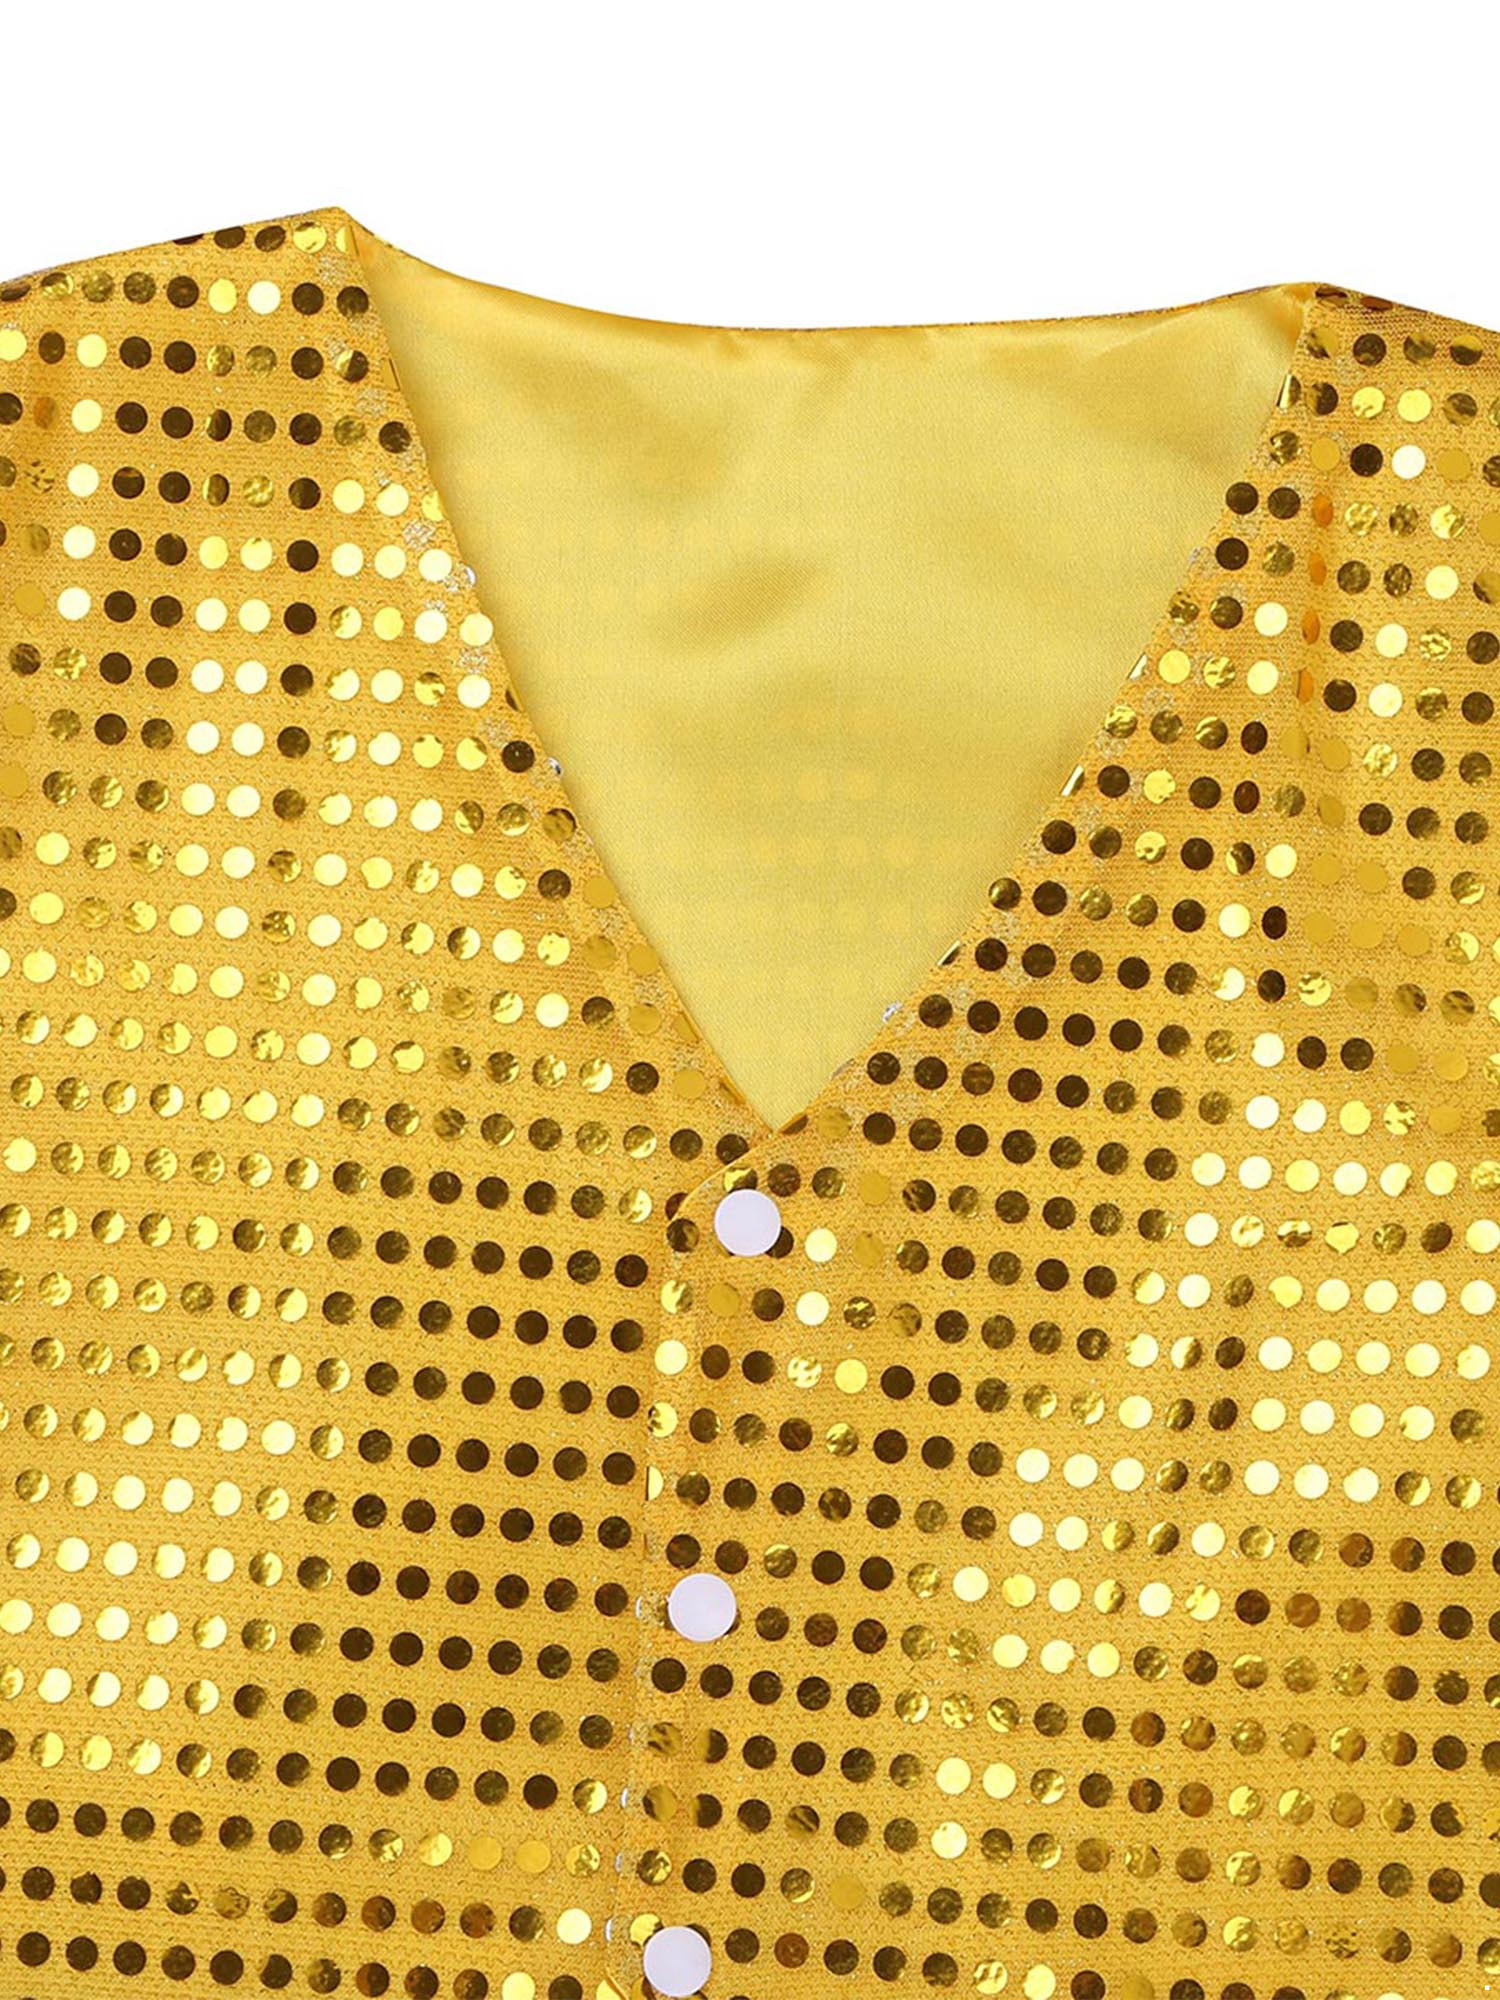 IEFIEL Kids Boys Sparkle Sequins Button Down Vest with Hat Dance Outfit Set Hip Hop Jazz Stage Performance Costume Gold 11-12 - image 5 of 7